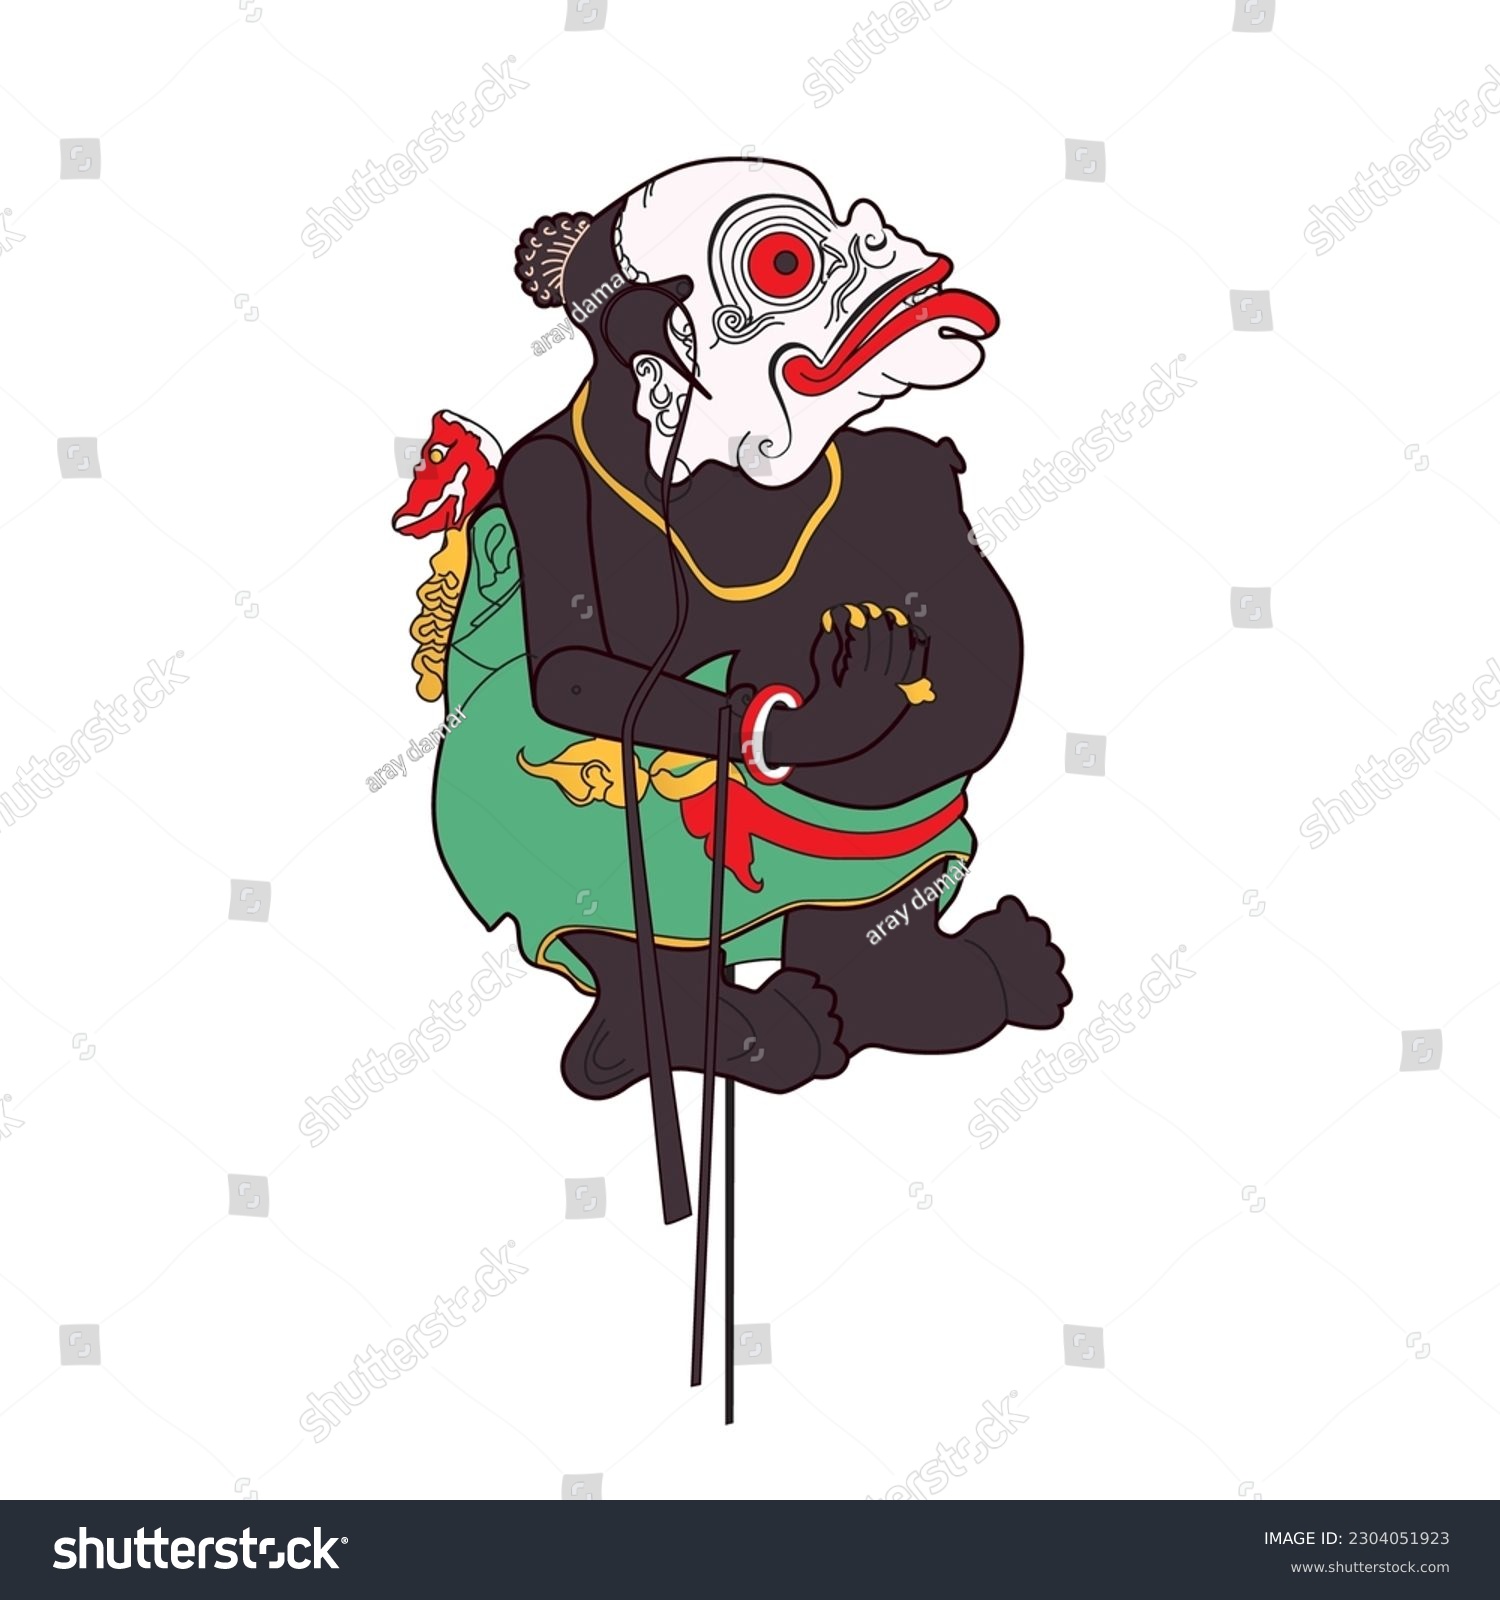 SVG of Illustration of a wayang from Indonesia named Bagong svg